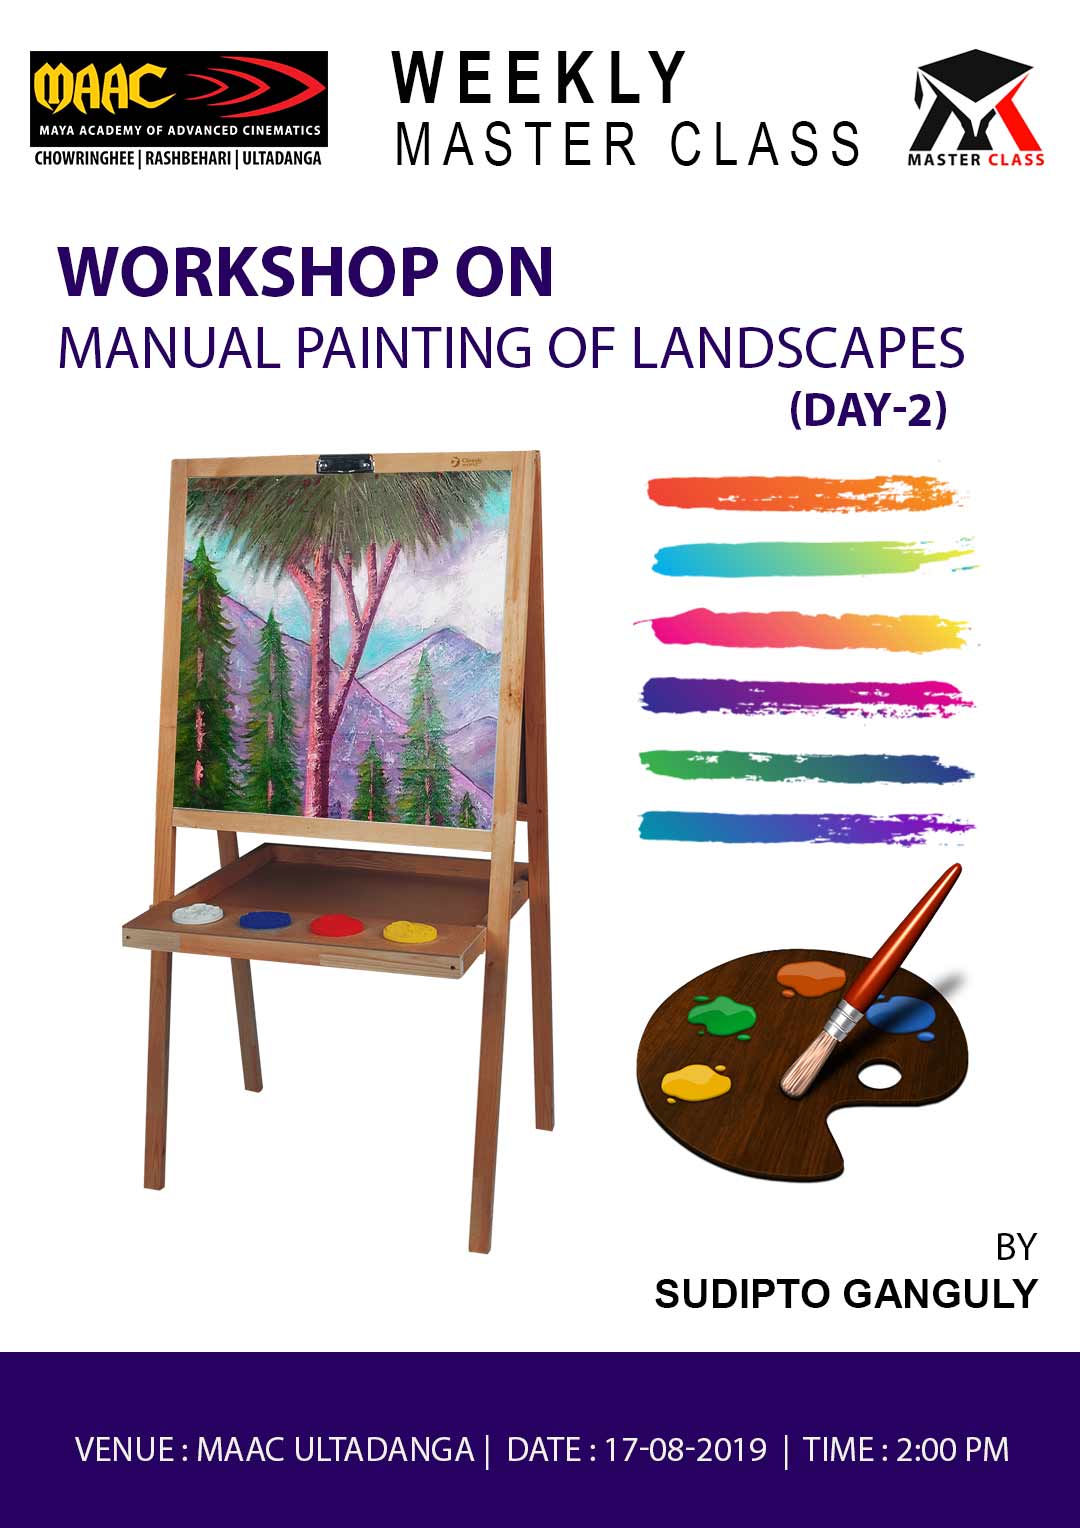 Weekly Master Class on Manual Painting of Landscapes Day 2